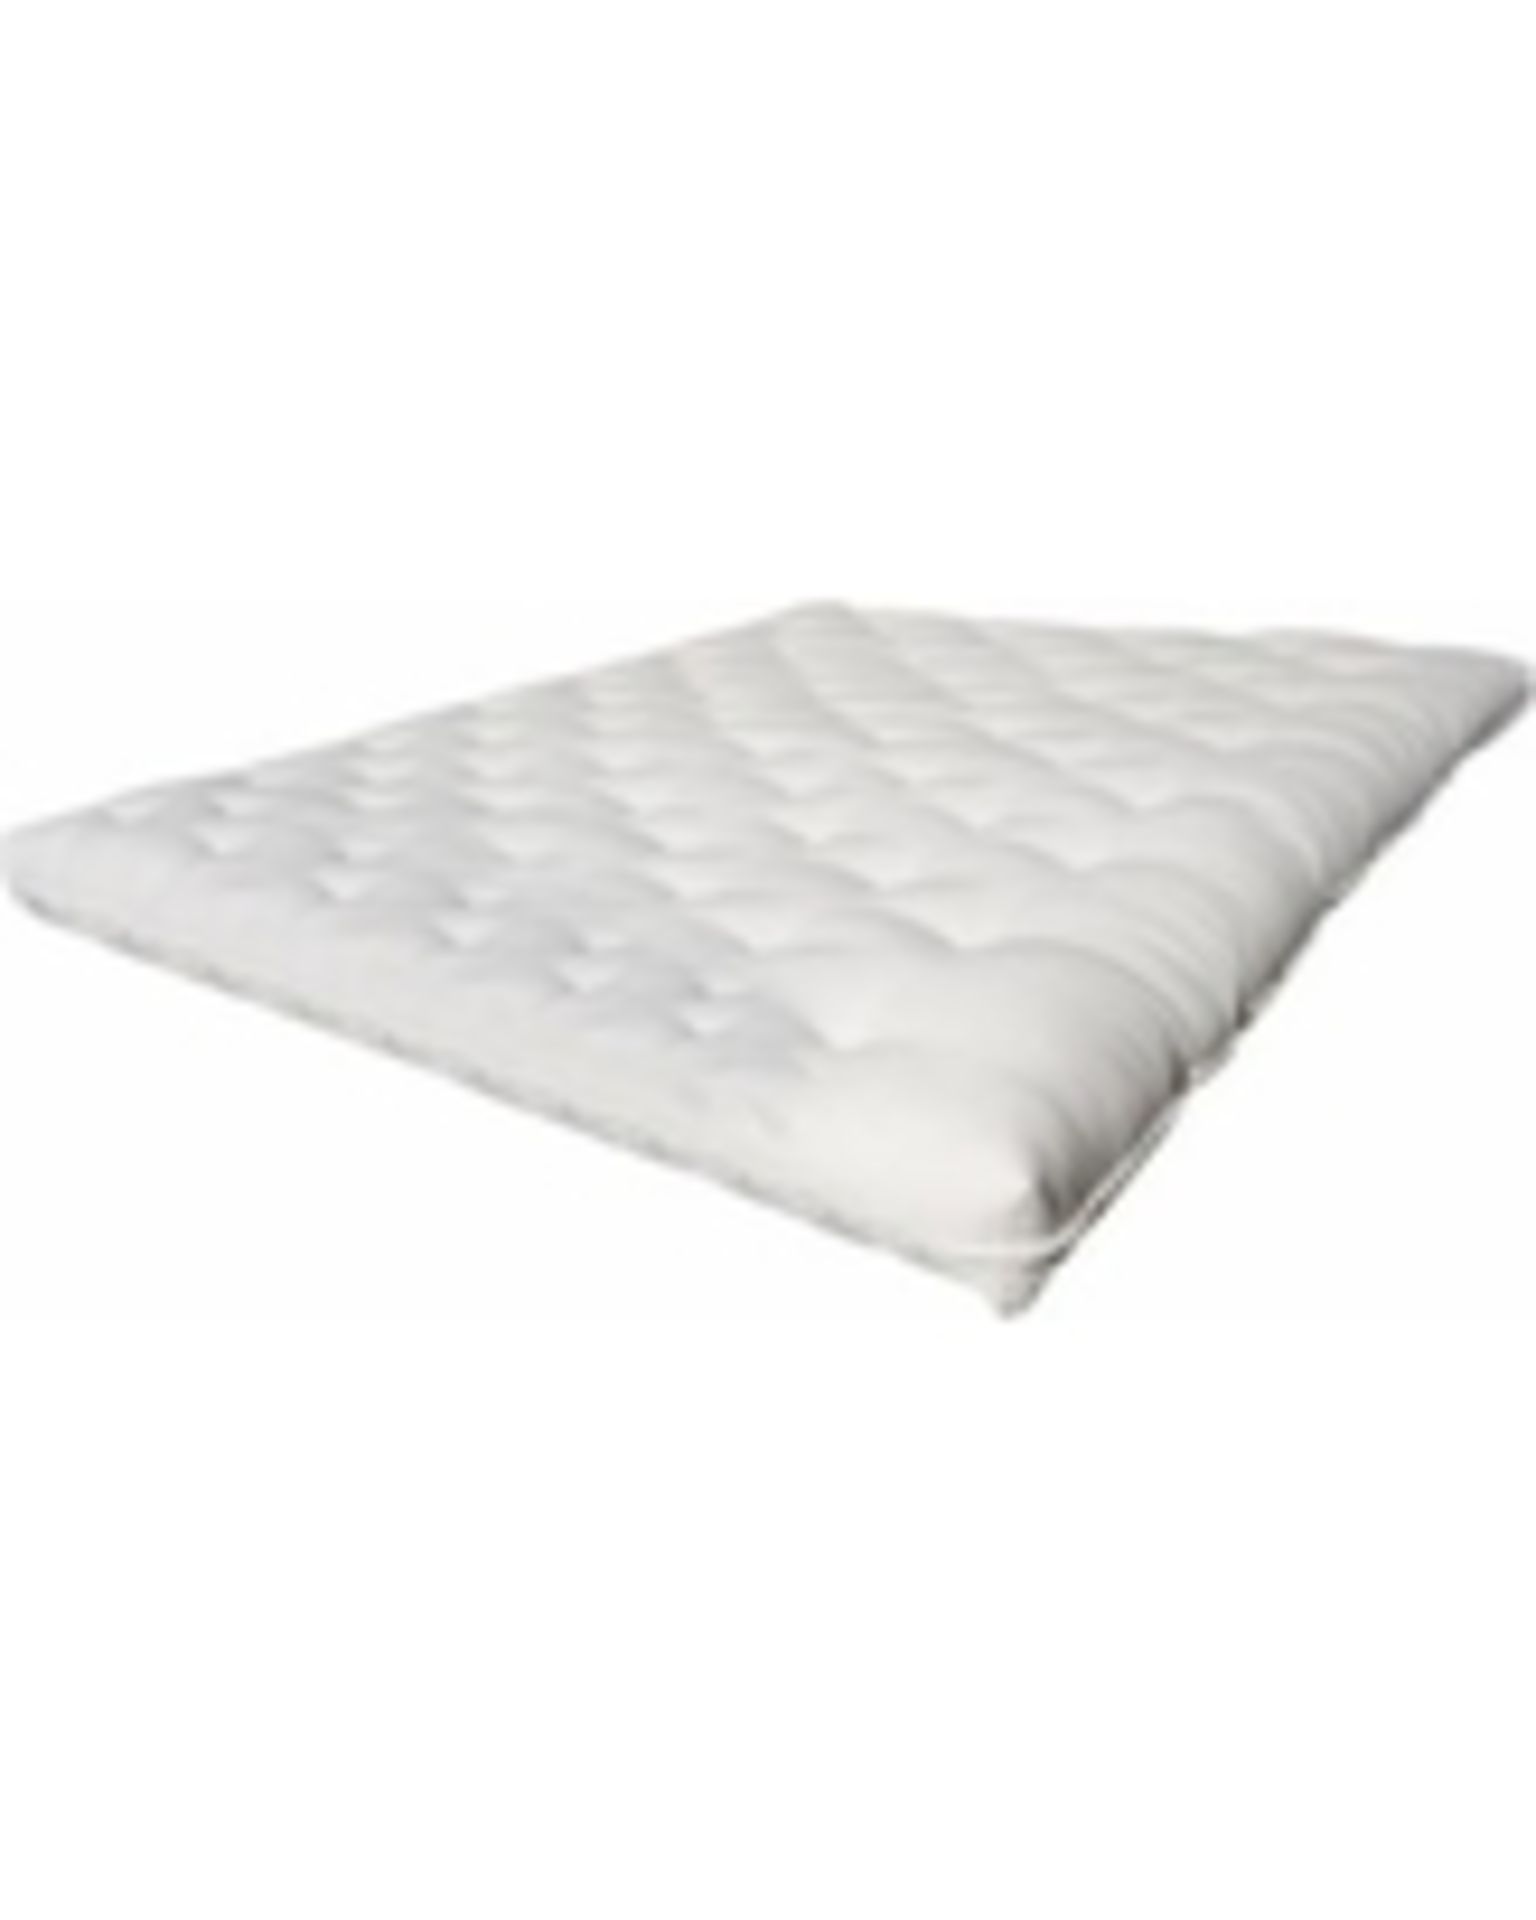 V Brand New Double Memory Foam Mattress Rolled - Contours To Your Body Shape - Suitable For Mattress - Image 2 of 4